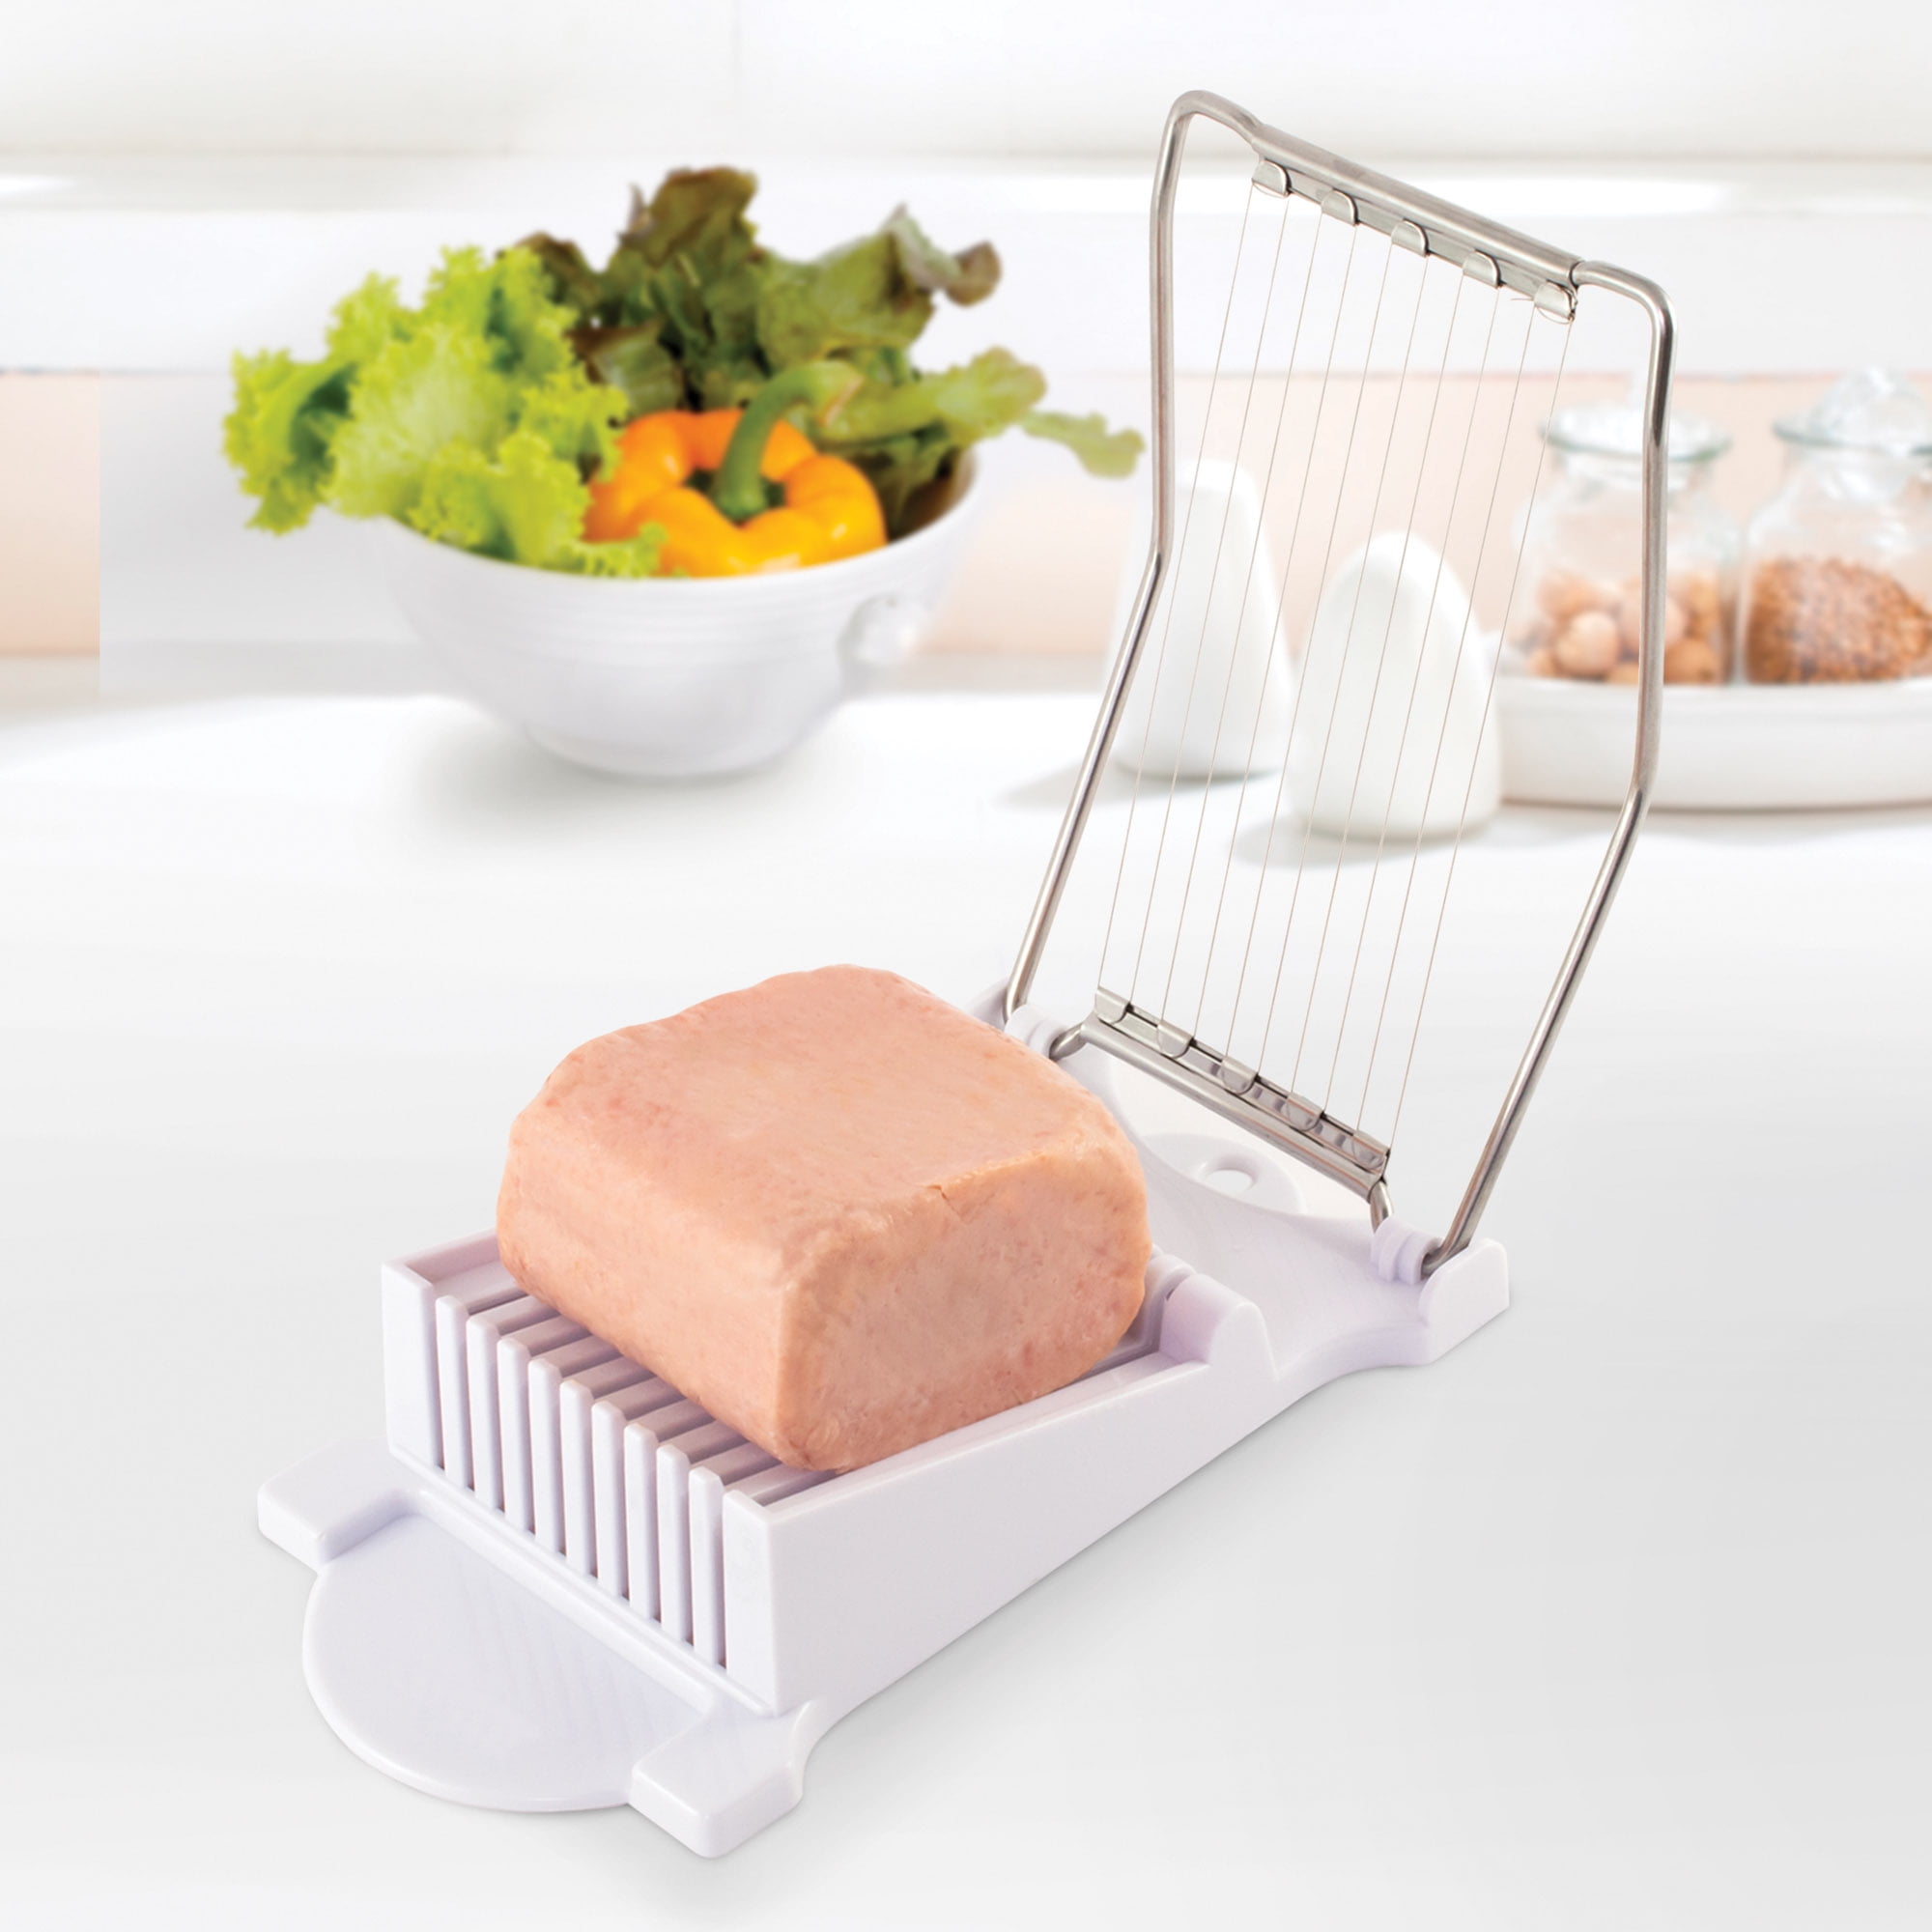 Luncheon Meat Slicer, Durable, Quality Stainless Steel 11 Wires for 12  Thinner Slices, Certified Safety, Slice Meats (Green)